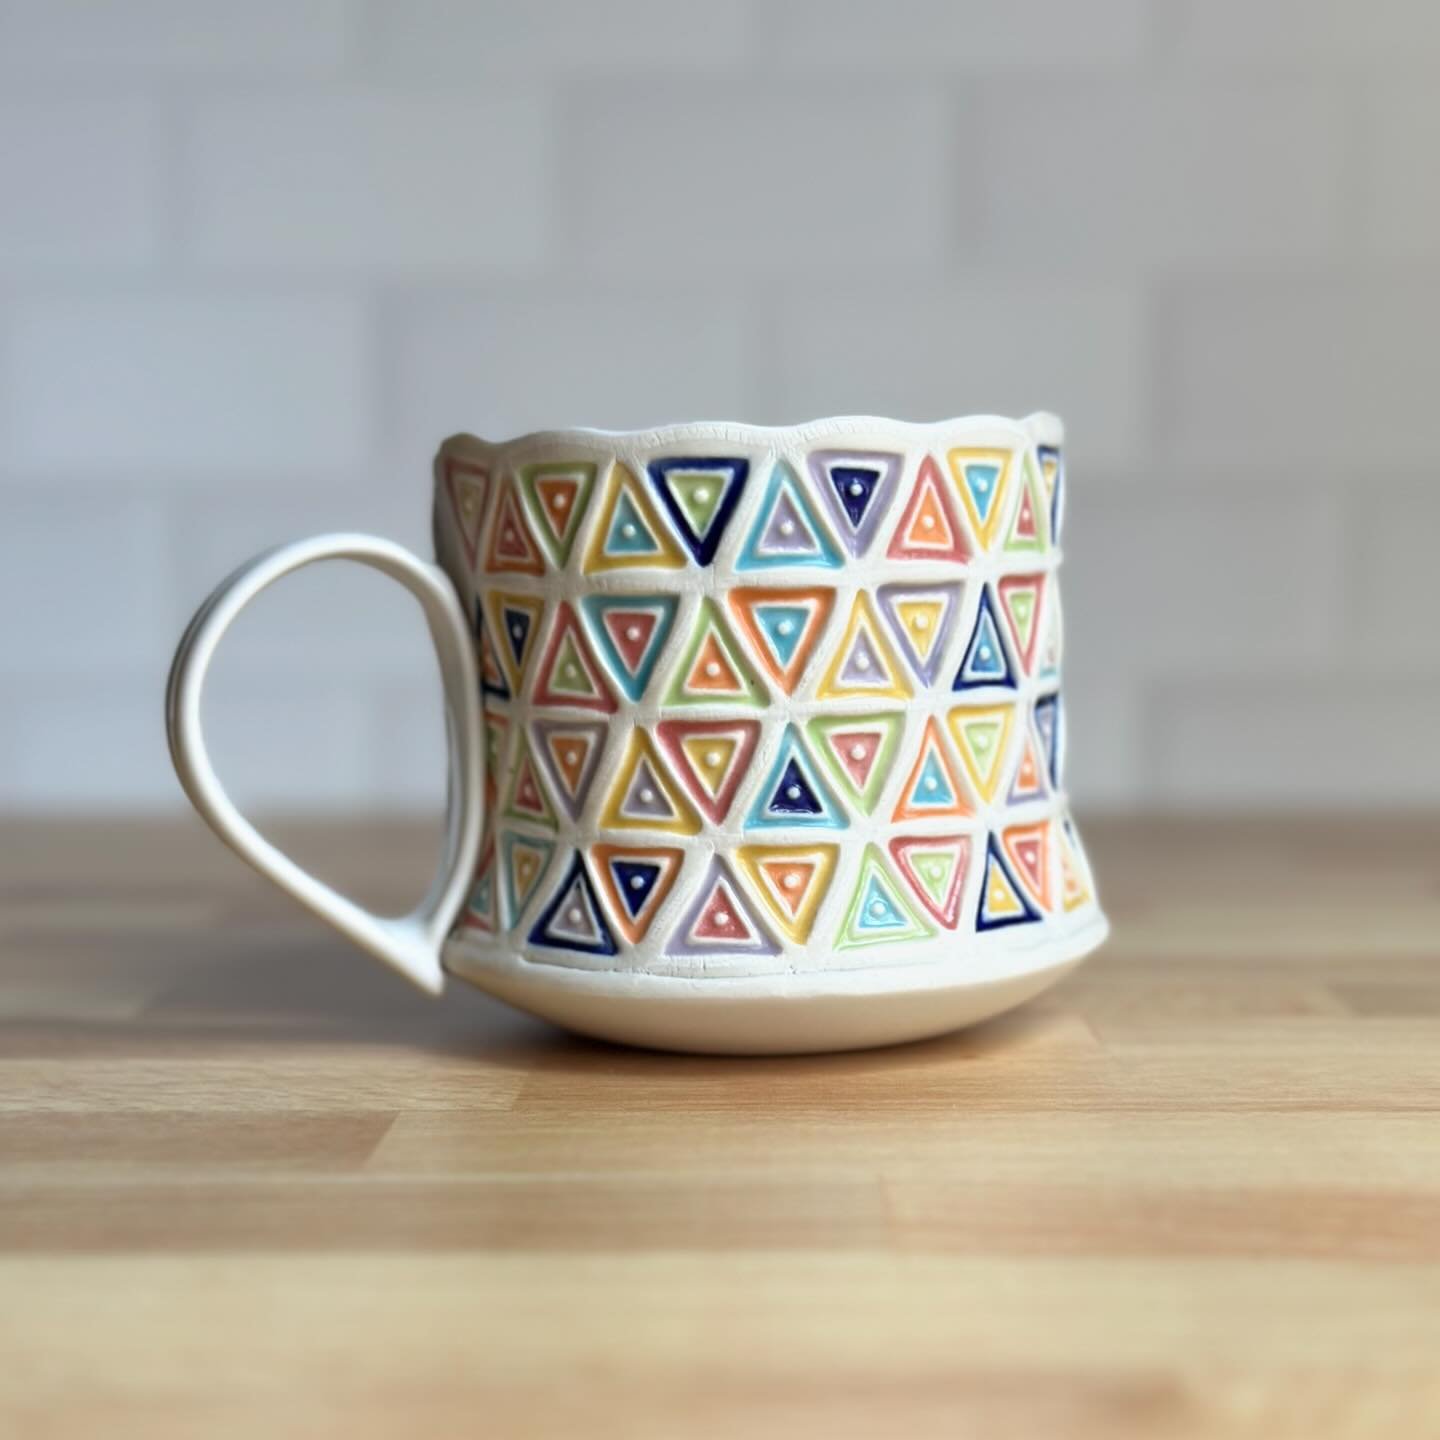 Good morning friends!  How are you doing?  Here is a mug I made. In lieu of a more creative title, I call this design Triangle Quilt.  Any suggestions for something better are welcomed. 😁 this is ^6 porcelain with celadon glaze in the stamped areas.